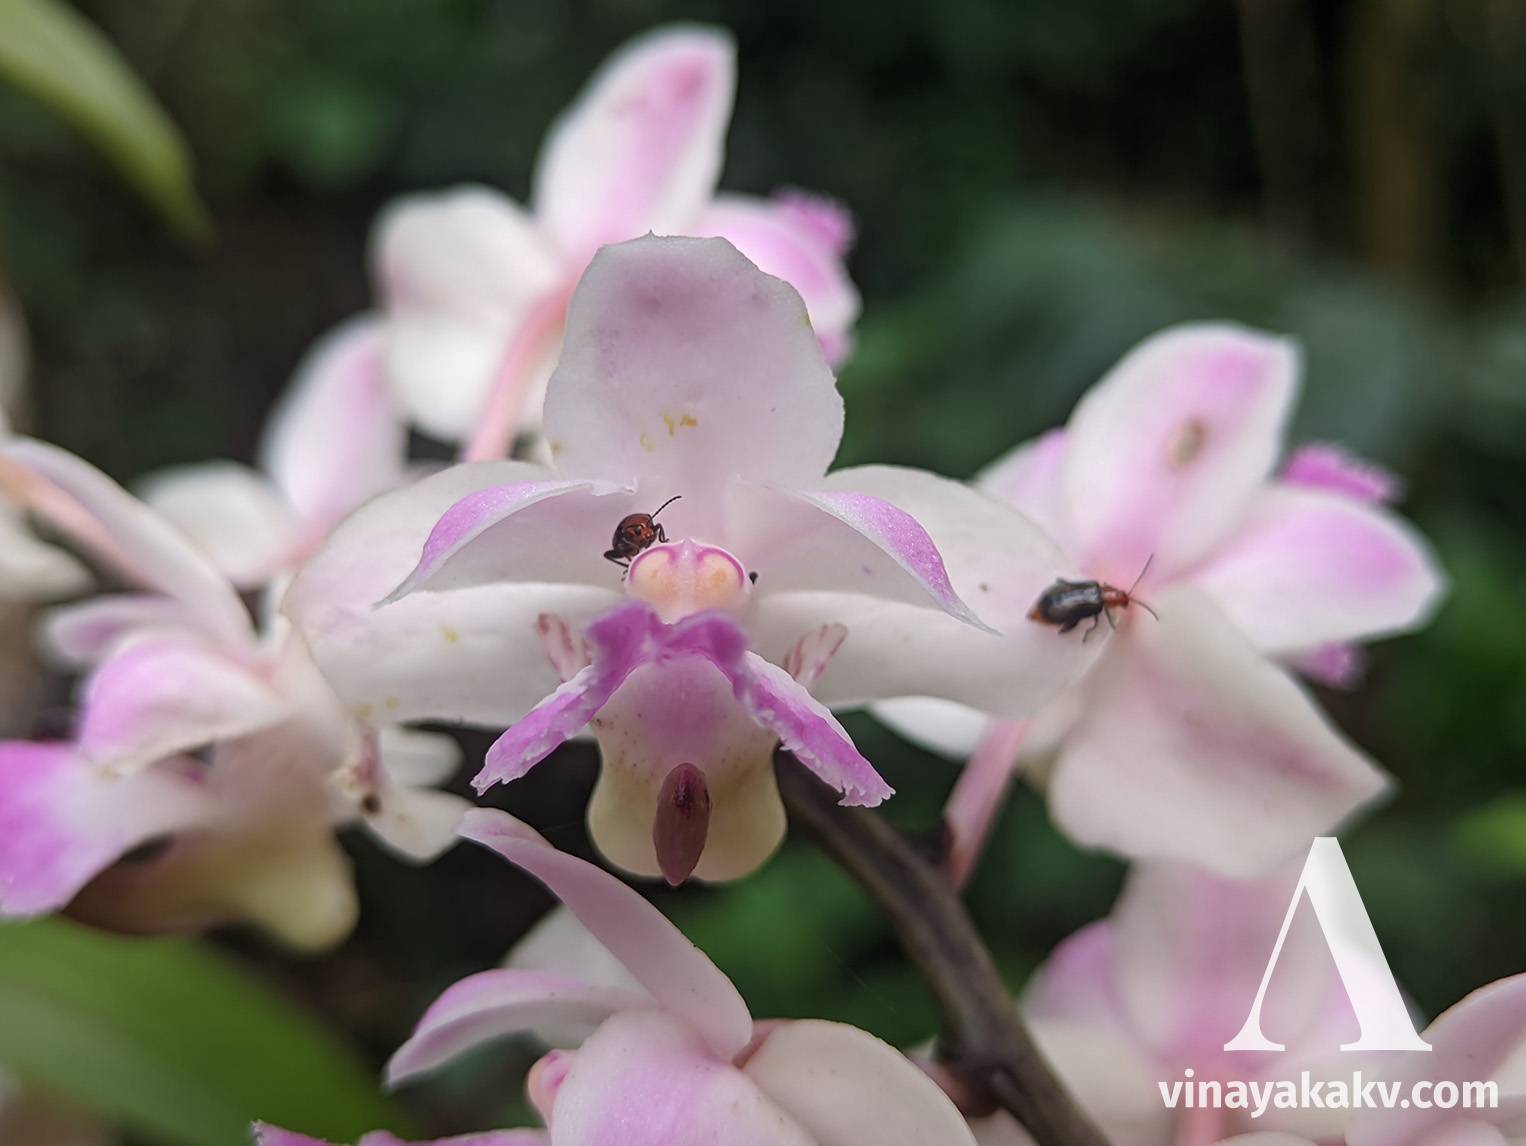 An _Aerides_ orchid, with its pollinator